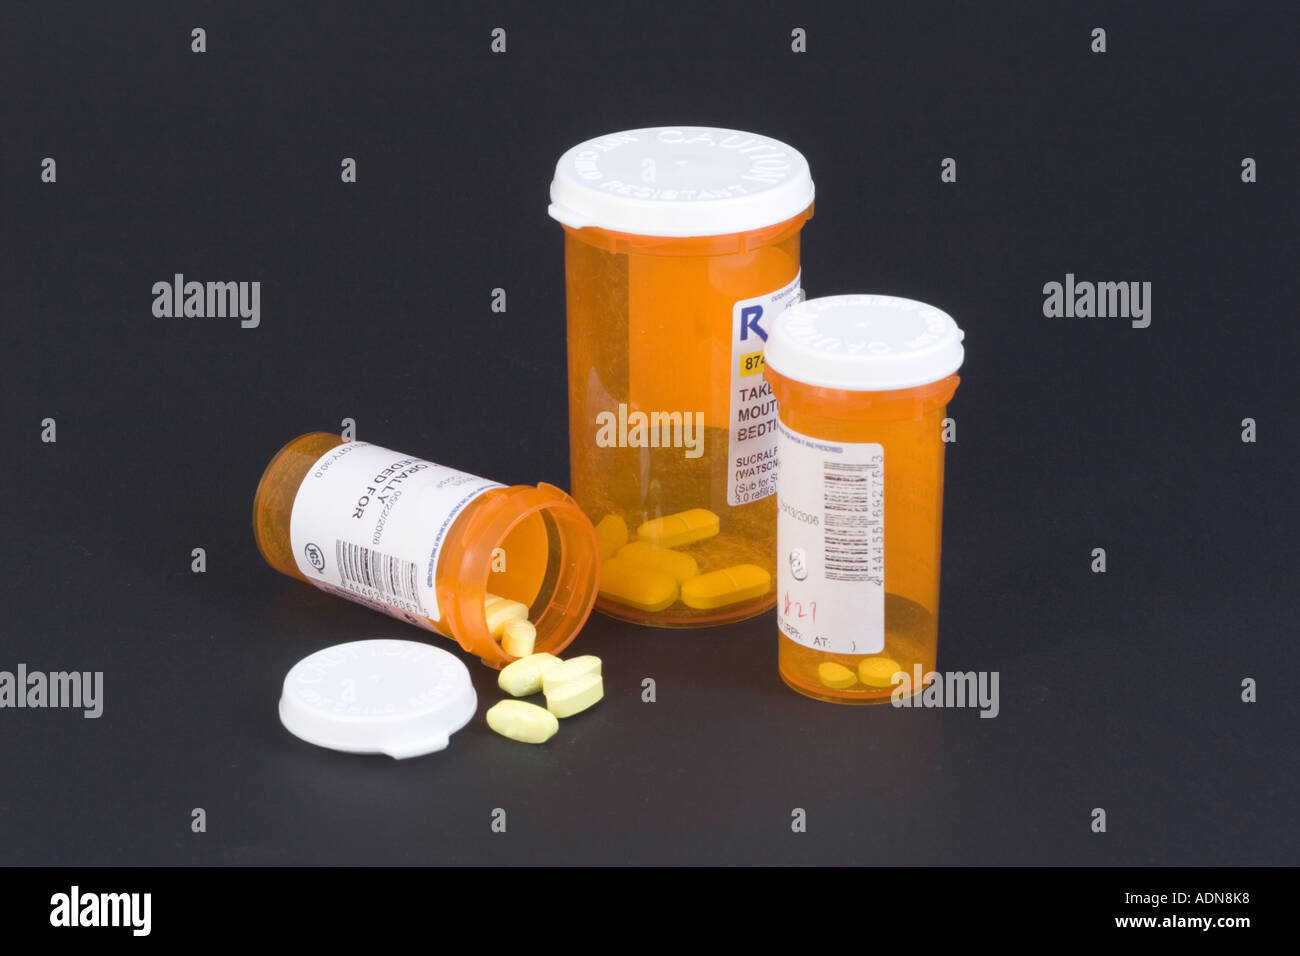 Three medicine pill bottles on black background with open and closed bottles and pills spilling out Stock Photo